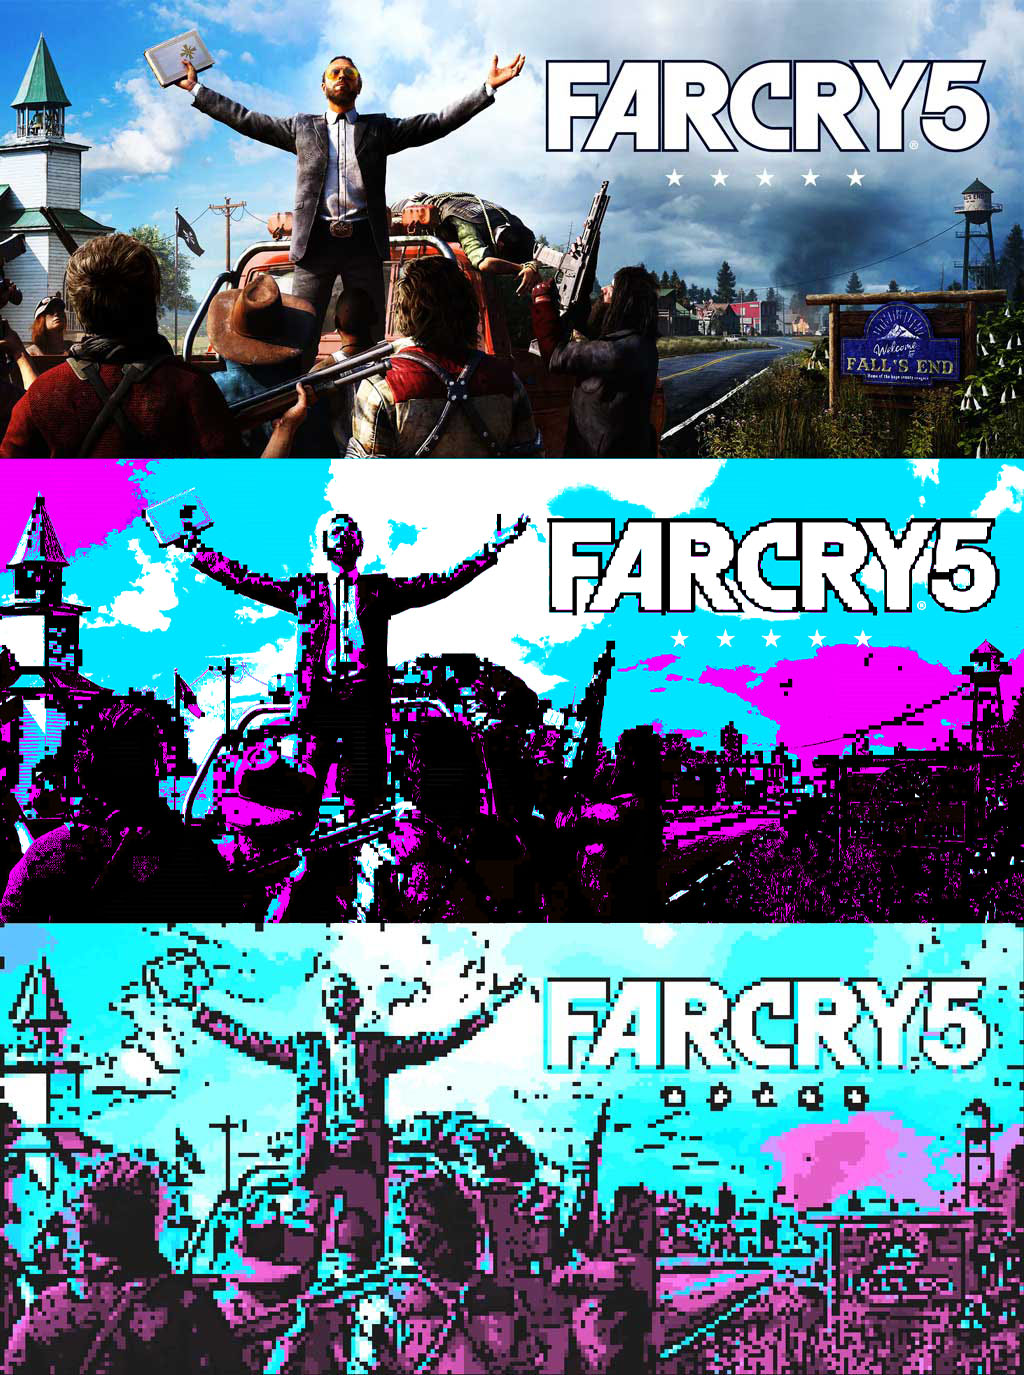 Farcry 5 Pixel Art With CGA Colors